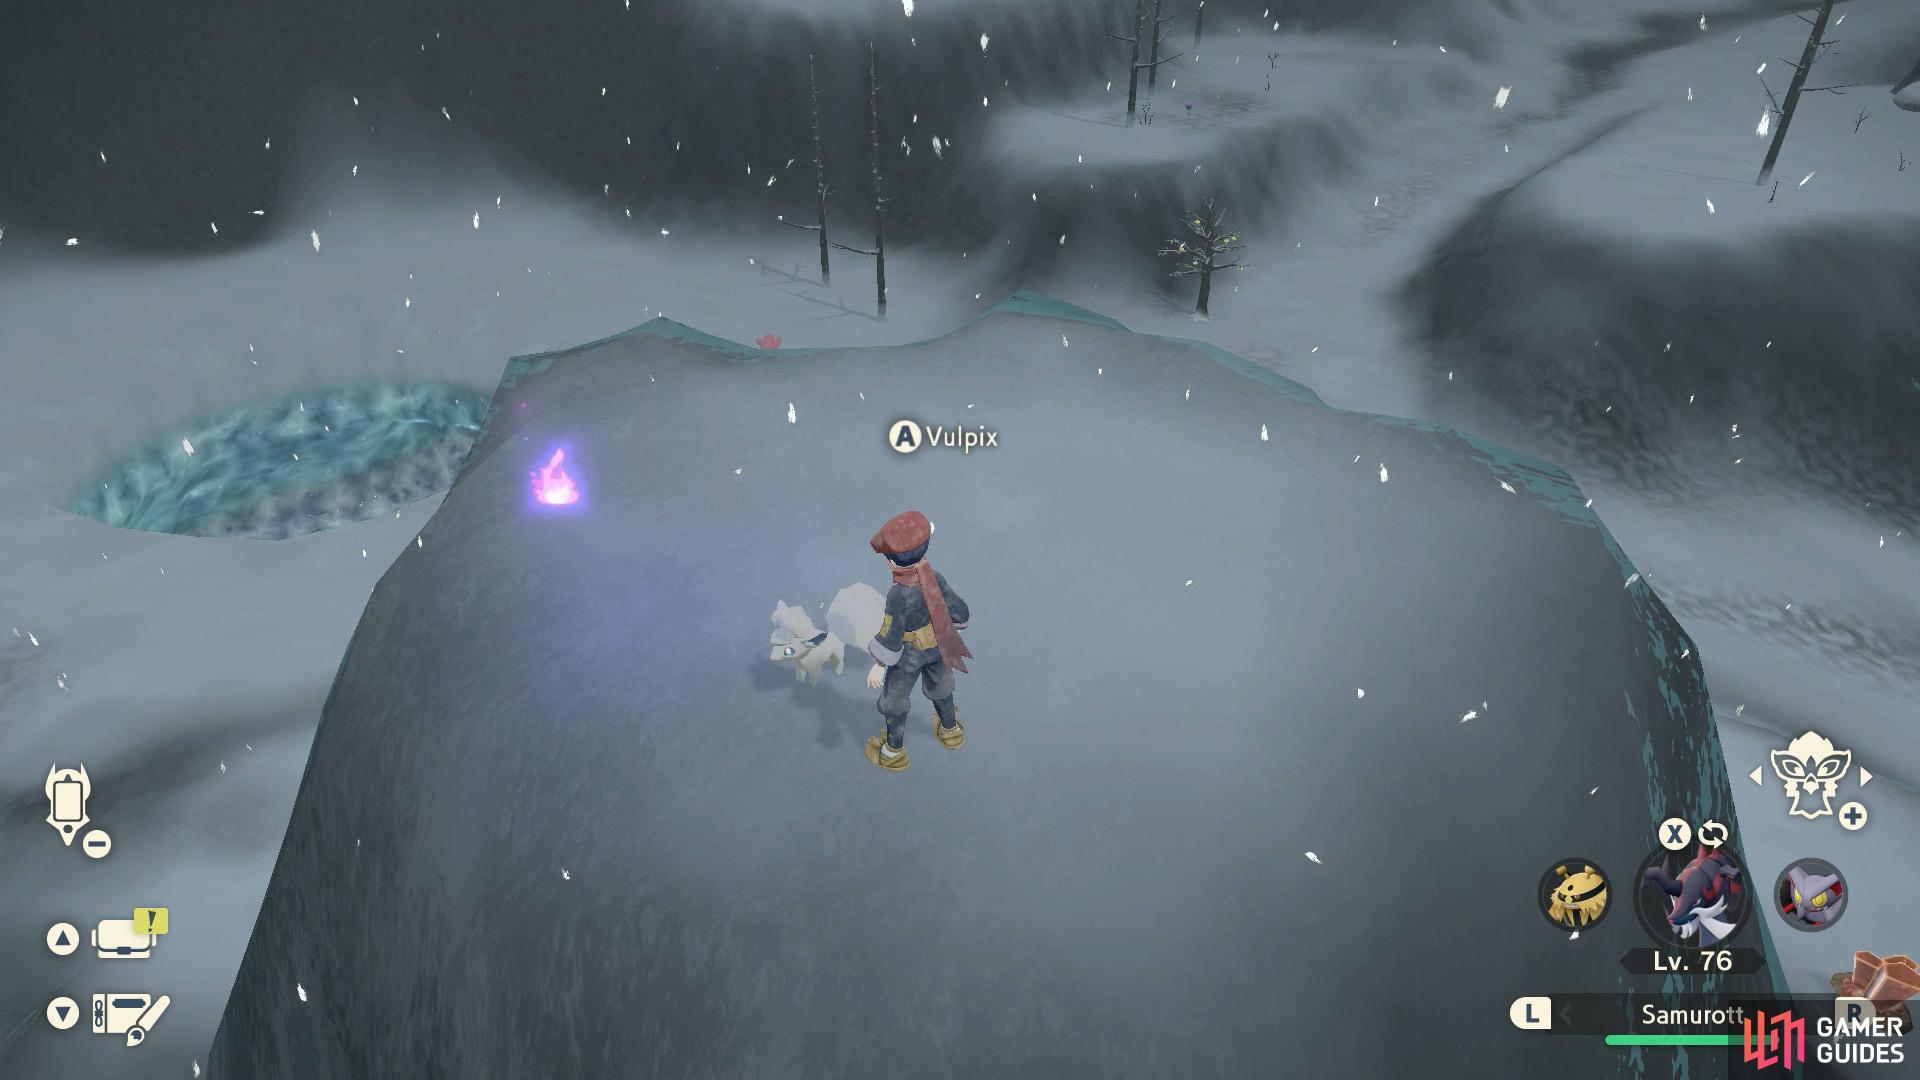 Vulpix 1: Atop a rocky mound towards the north. There's a Wisp next to it.